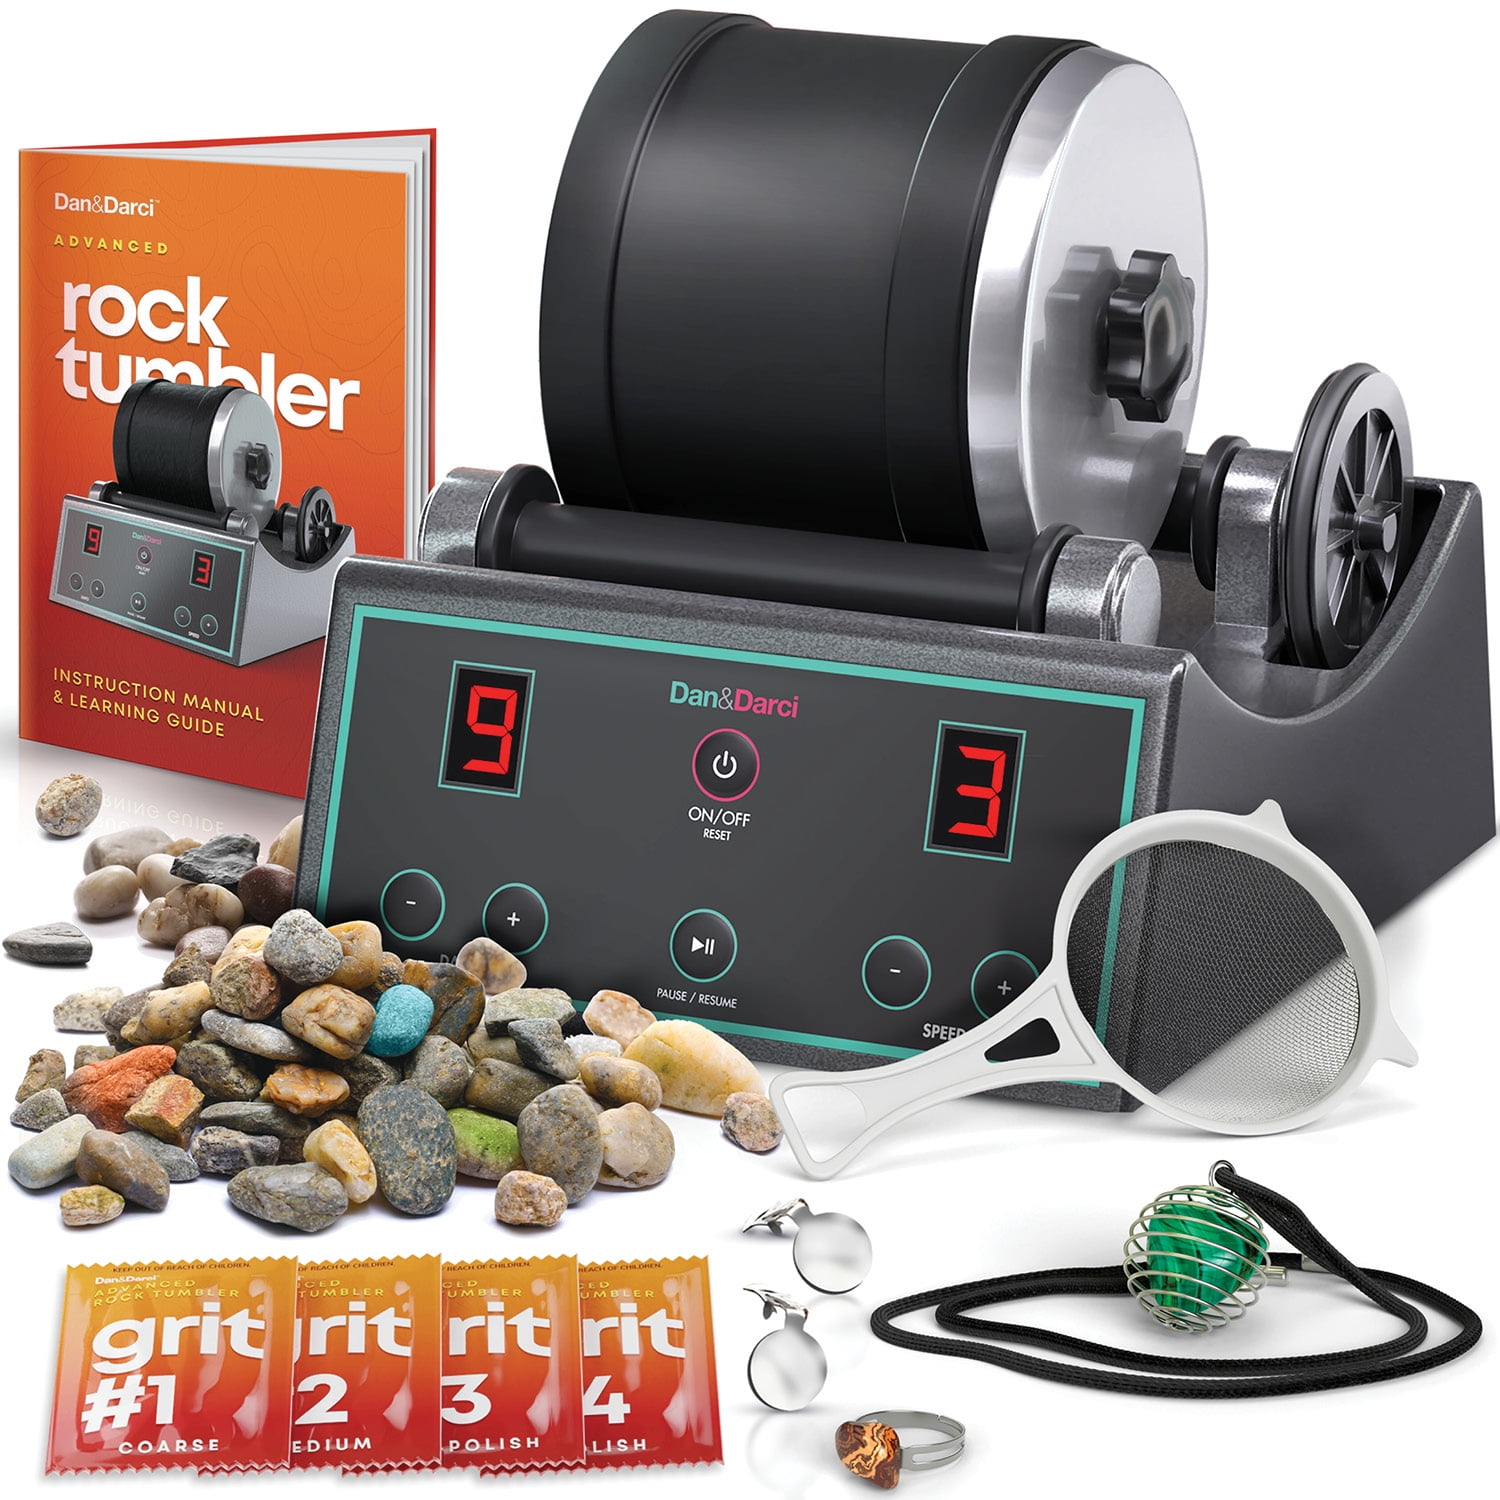 Tryes Rock Tumbler Kit Adults-Rock Polisher Tumbler with Noise Reduction  Cover, Speed&Timer Control, Complete Rock Tumbling Kit,Learning Guide etc.